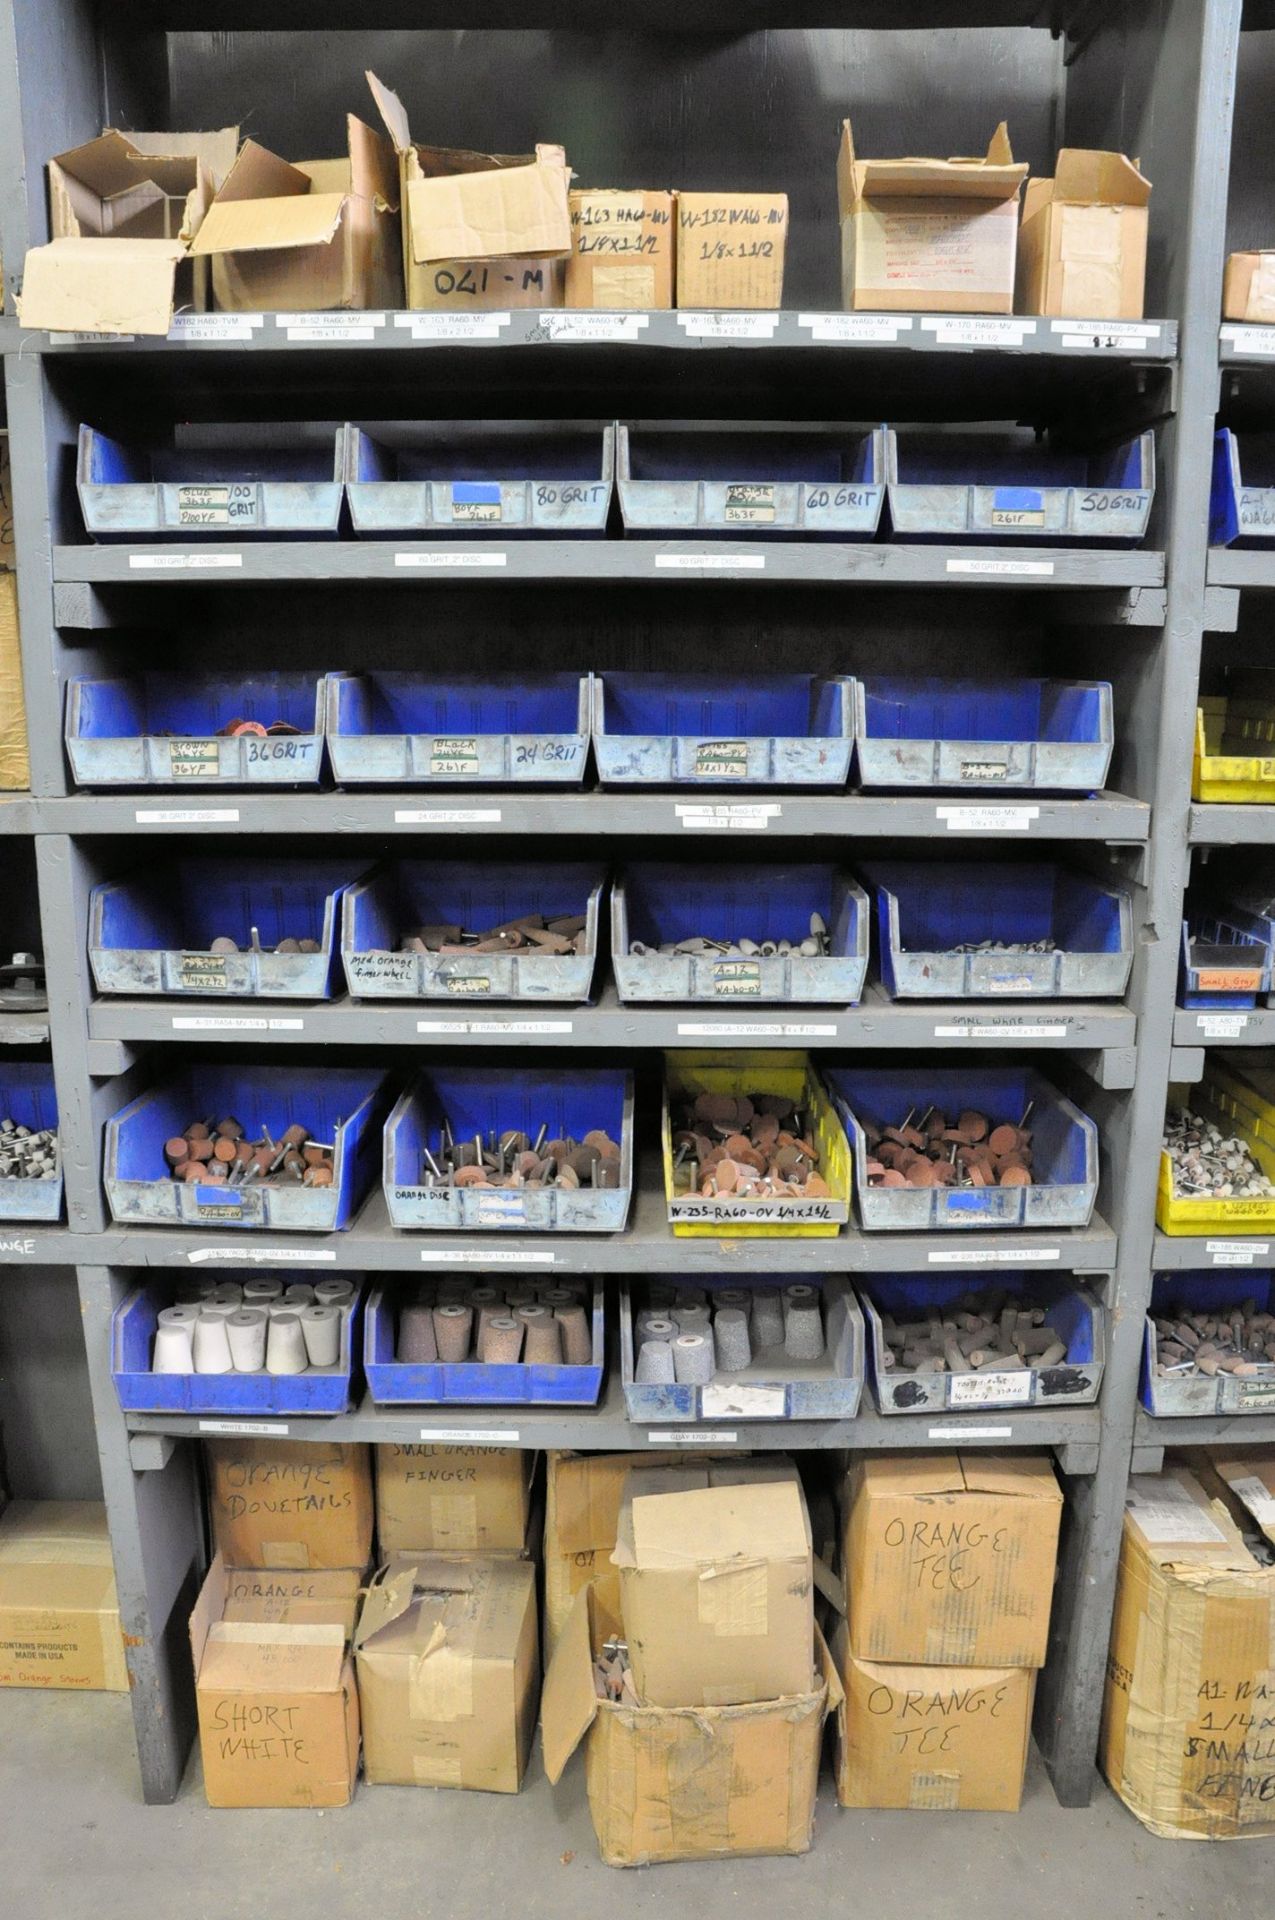 Lot-Grinding Stones, Sanding Supplies, etc. in (6) Sections and Top of Shelving Unit, (Shelving - Image 3 of 11